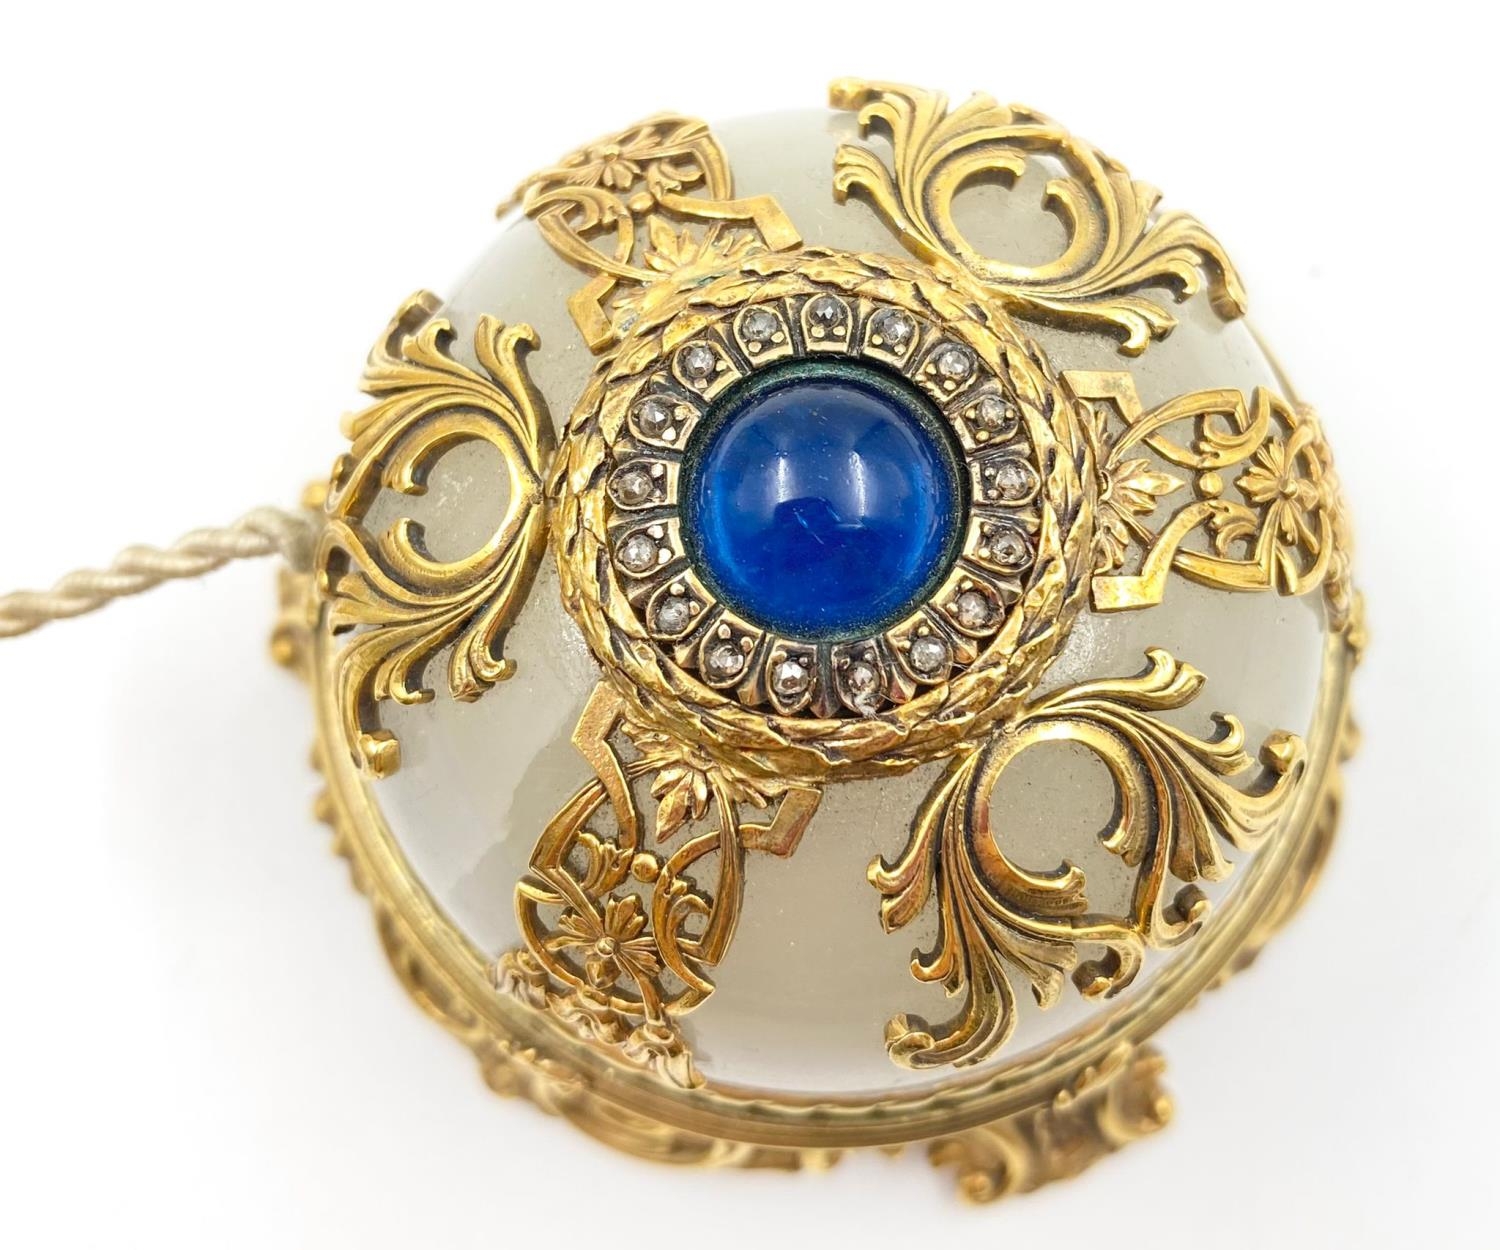 An Antique Russian Silver Gilt and Diamond Table Bell. White Onyx with a centre Sri Lankan Sapphire. - Image 3 of 6